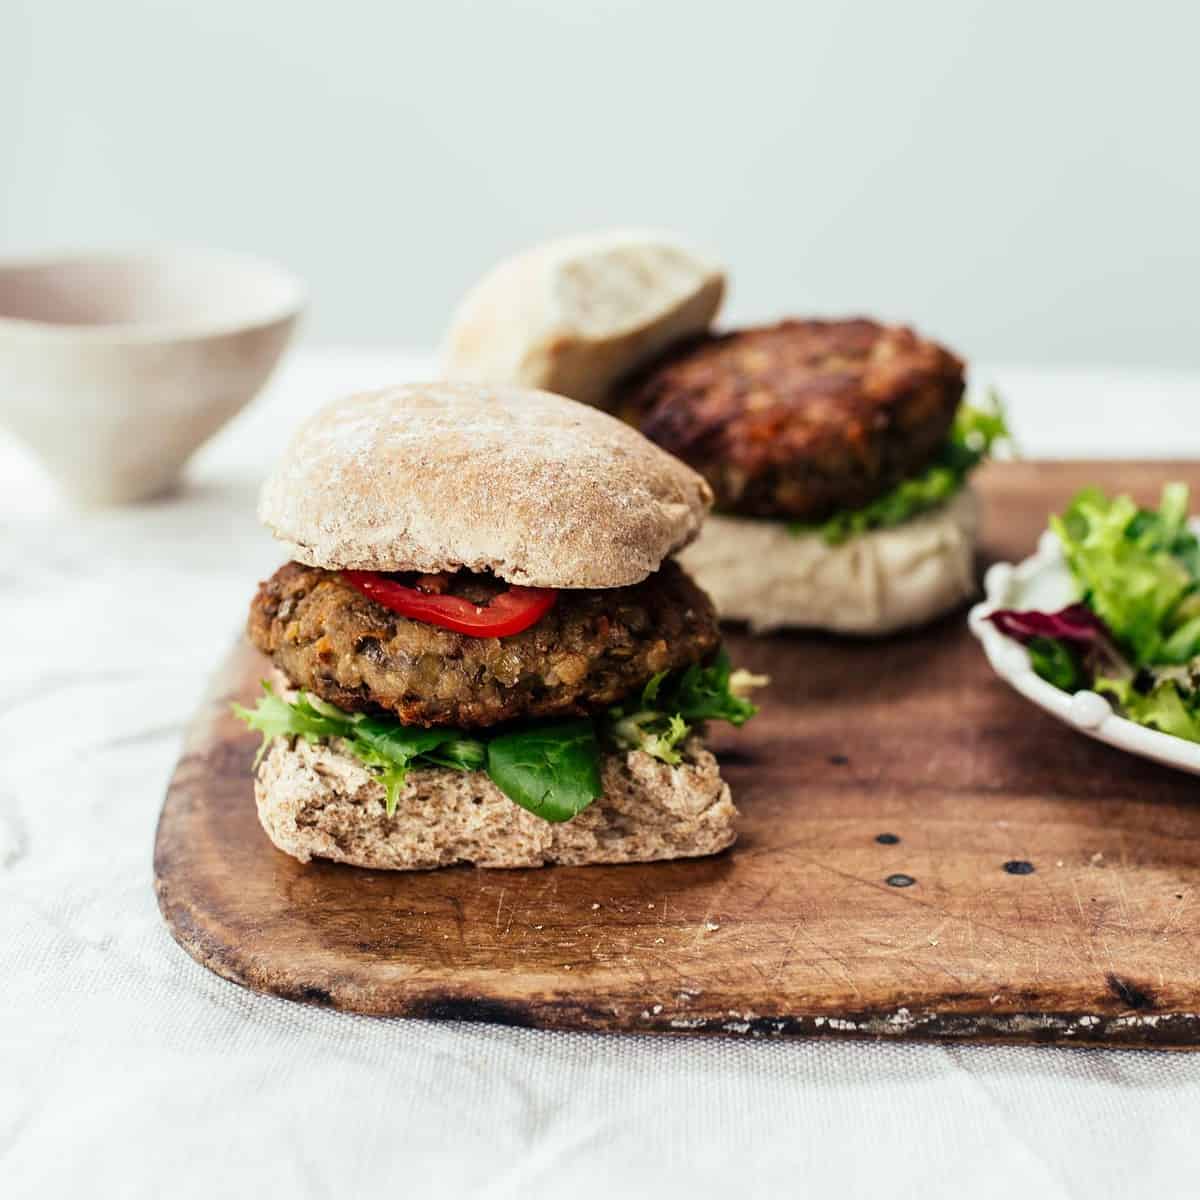  Feasting on these vegan burgers has never been more satisfying.